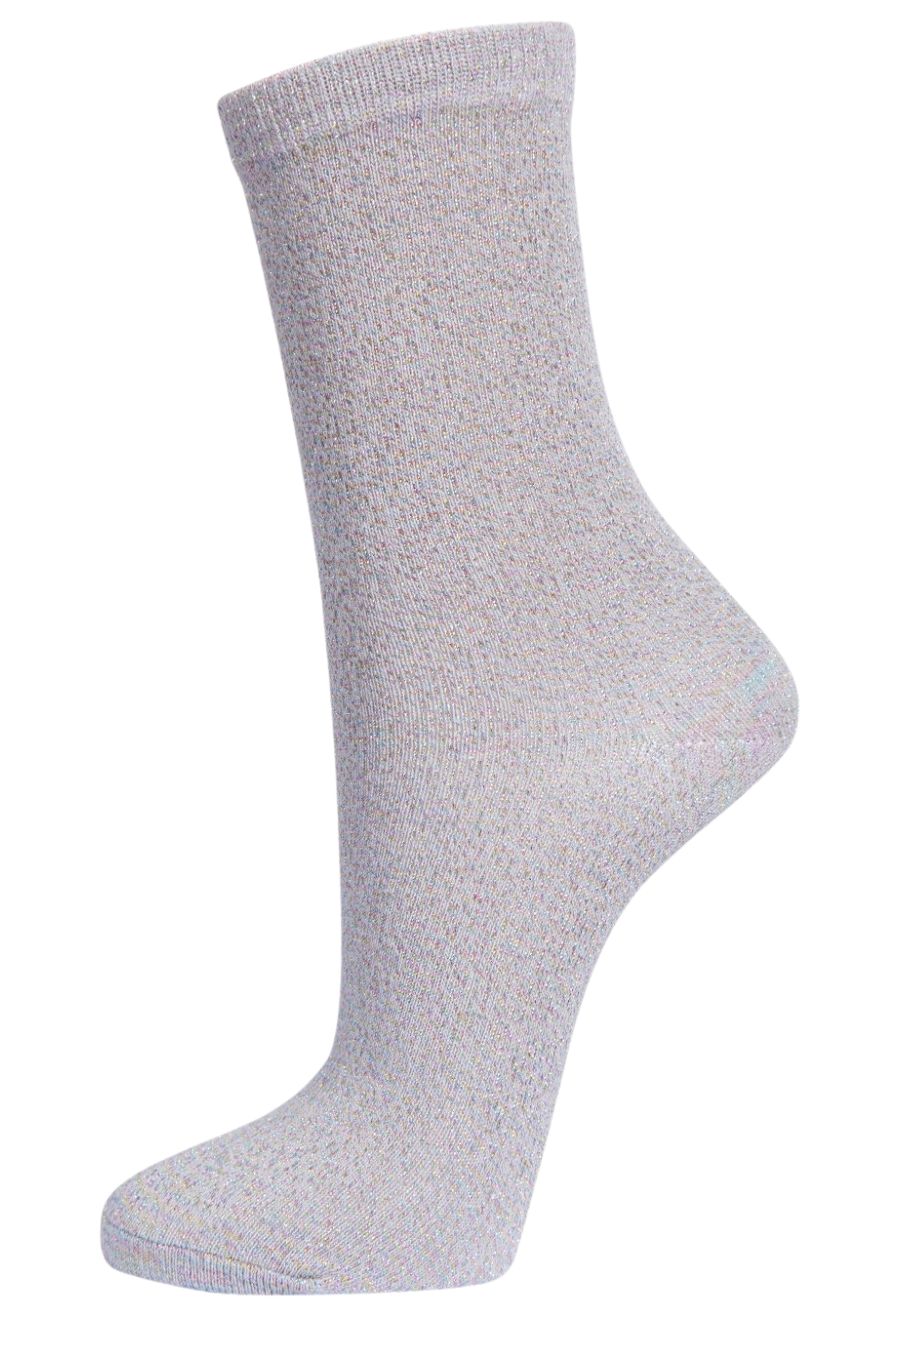 grey ankle socks with an all over multicoloured rainbow glitter shimmer